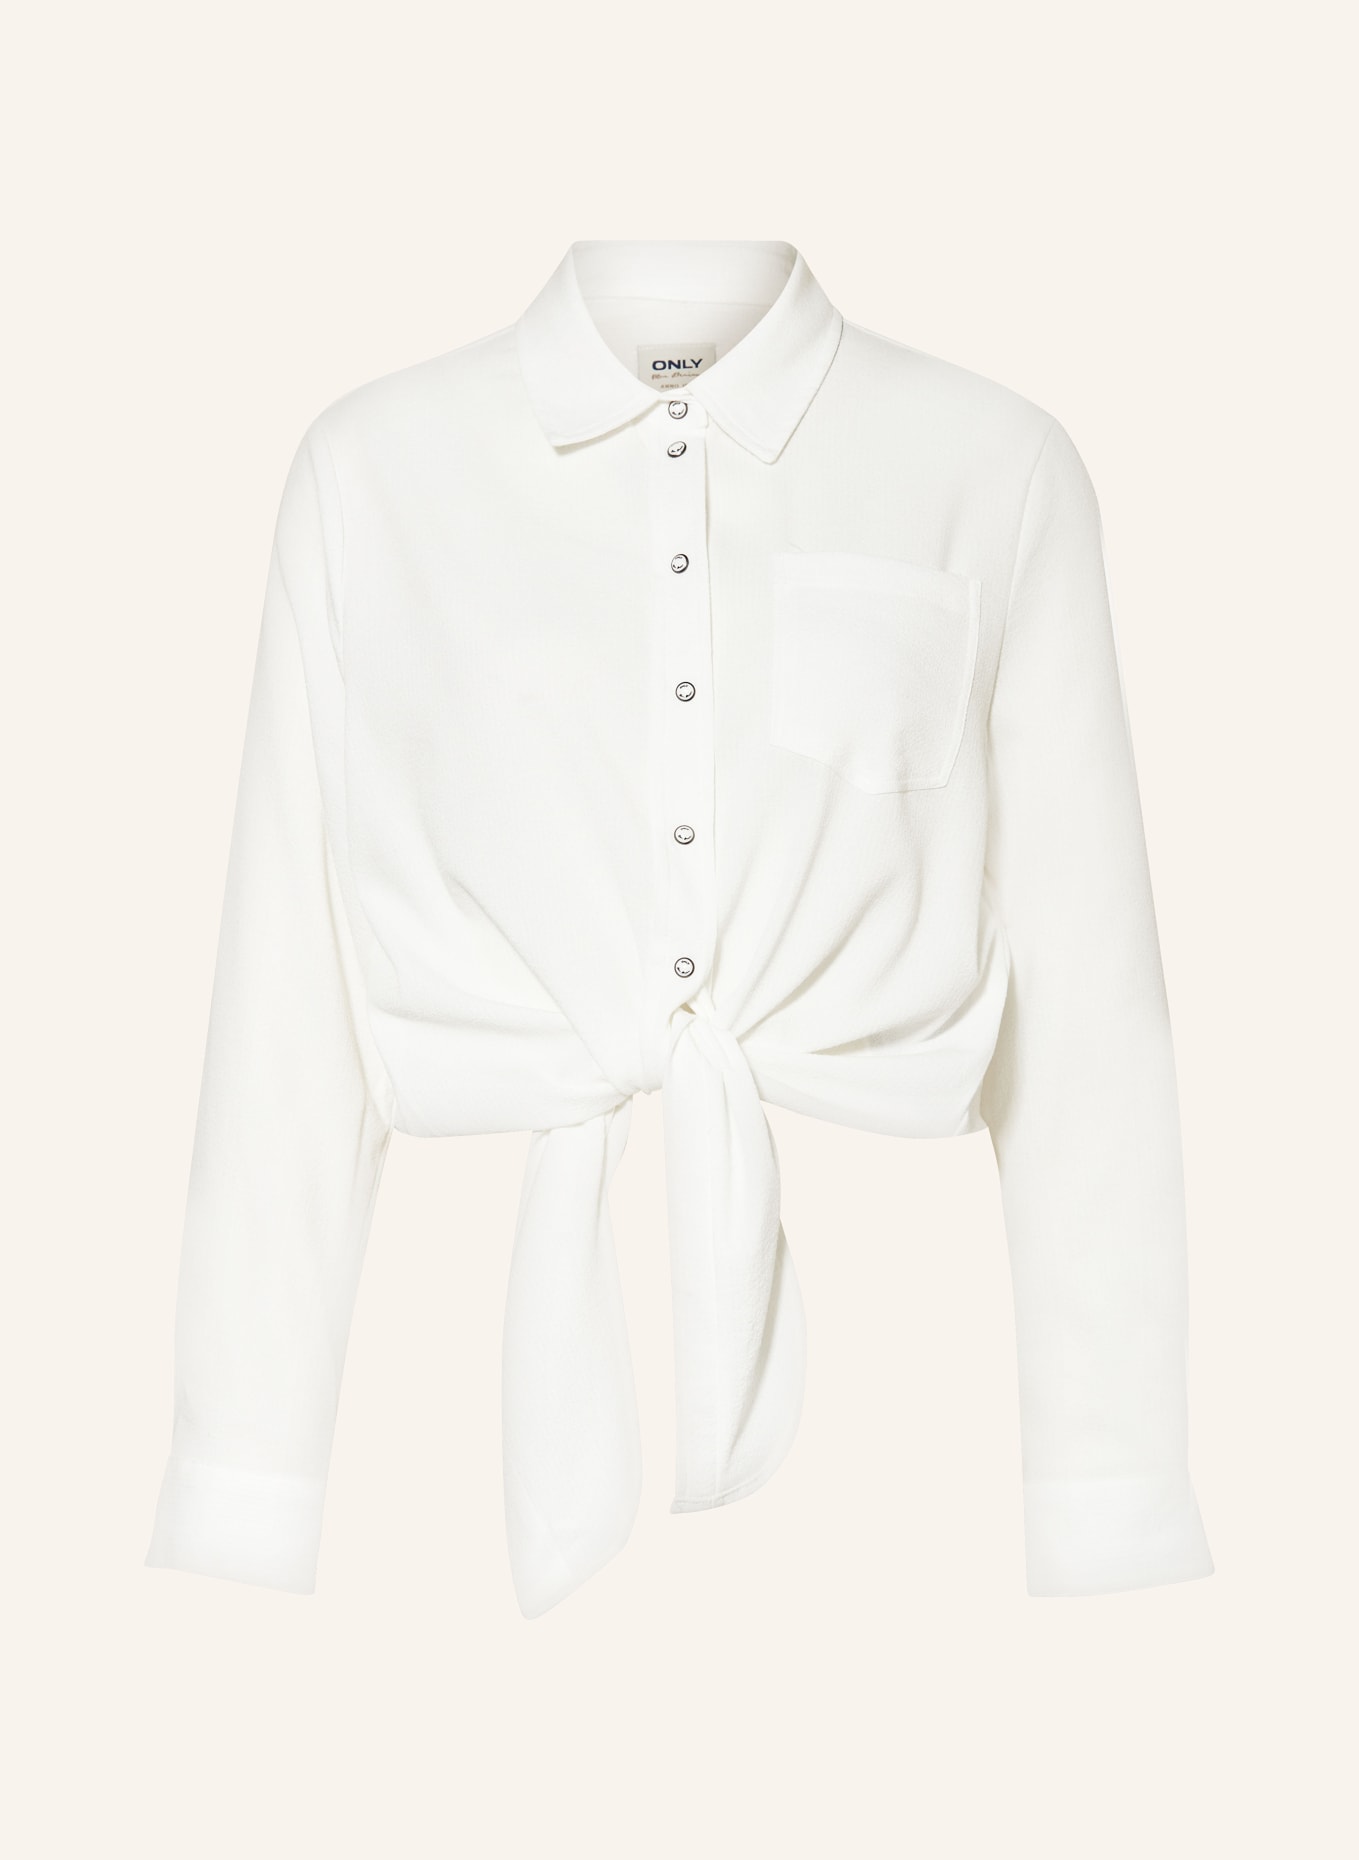 ONLY Shirt blouse, Color: WHITE (Image 1)